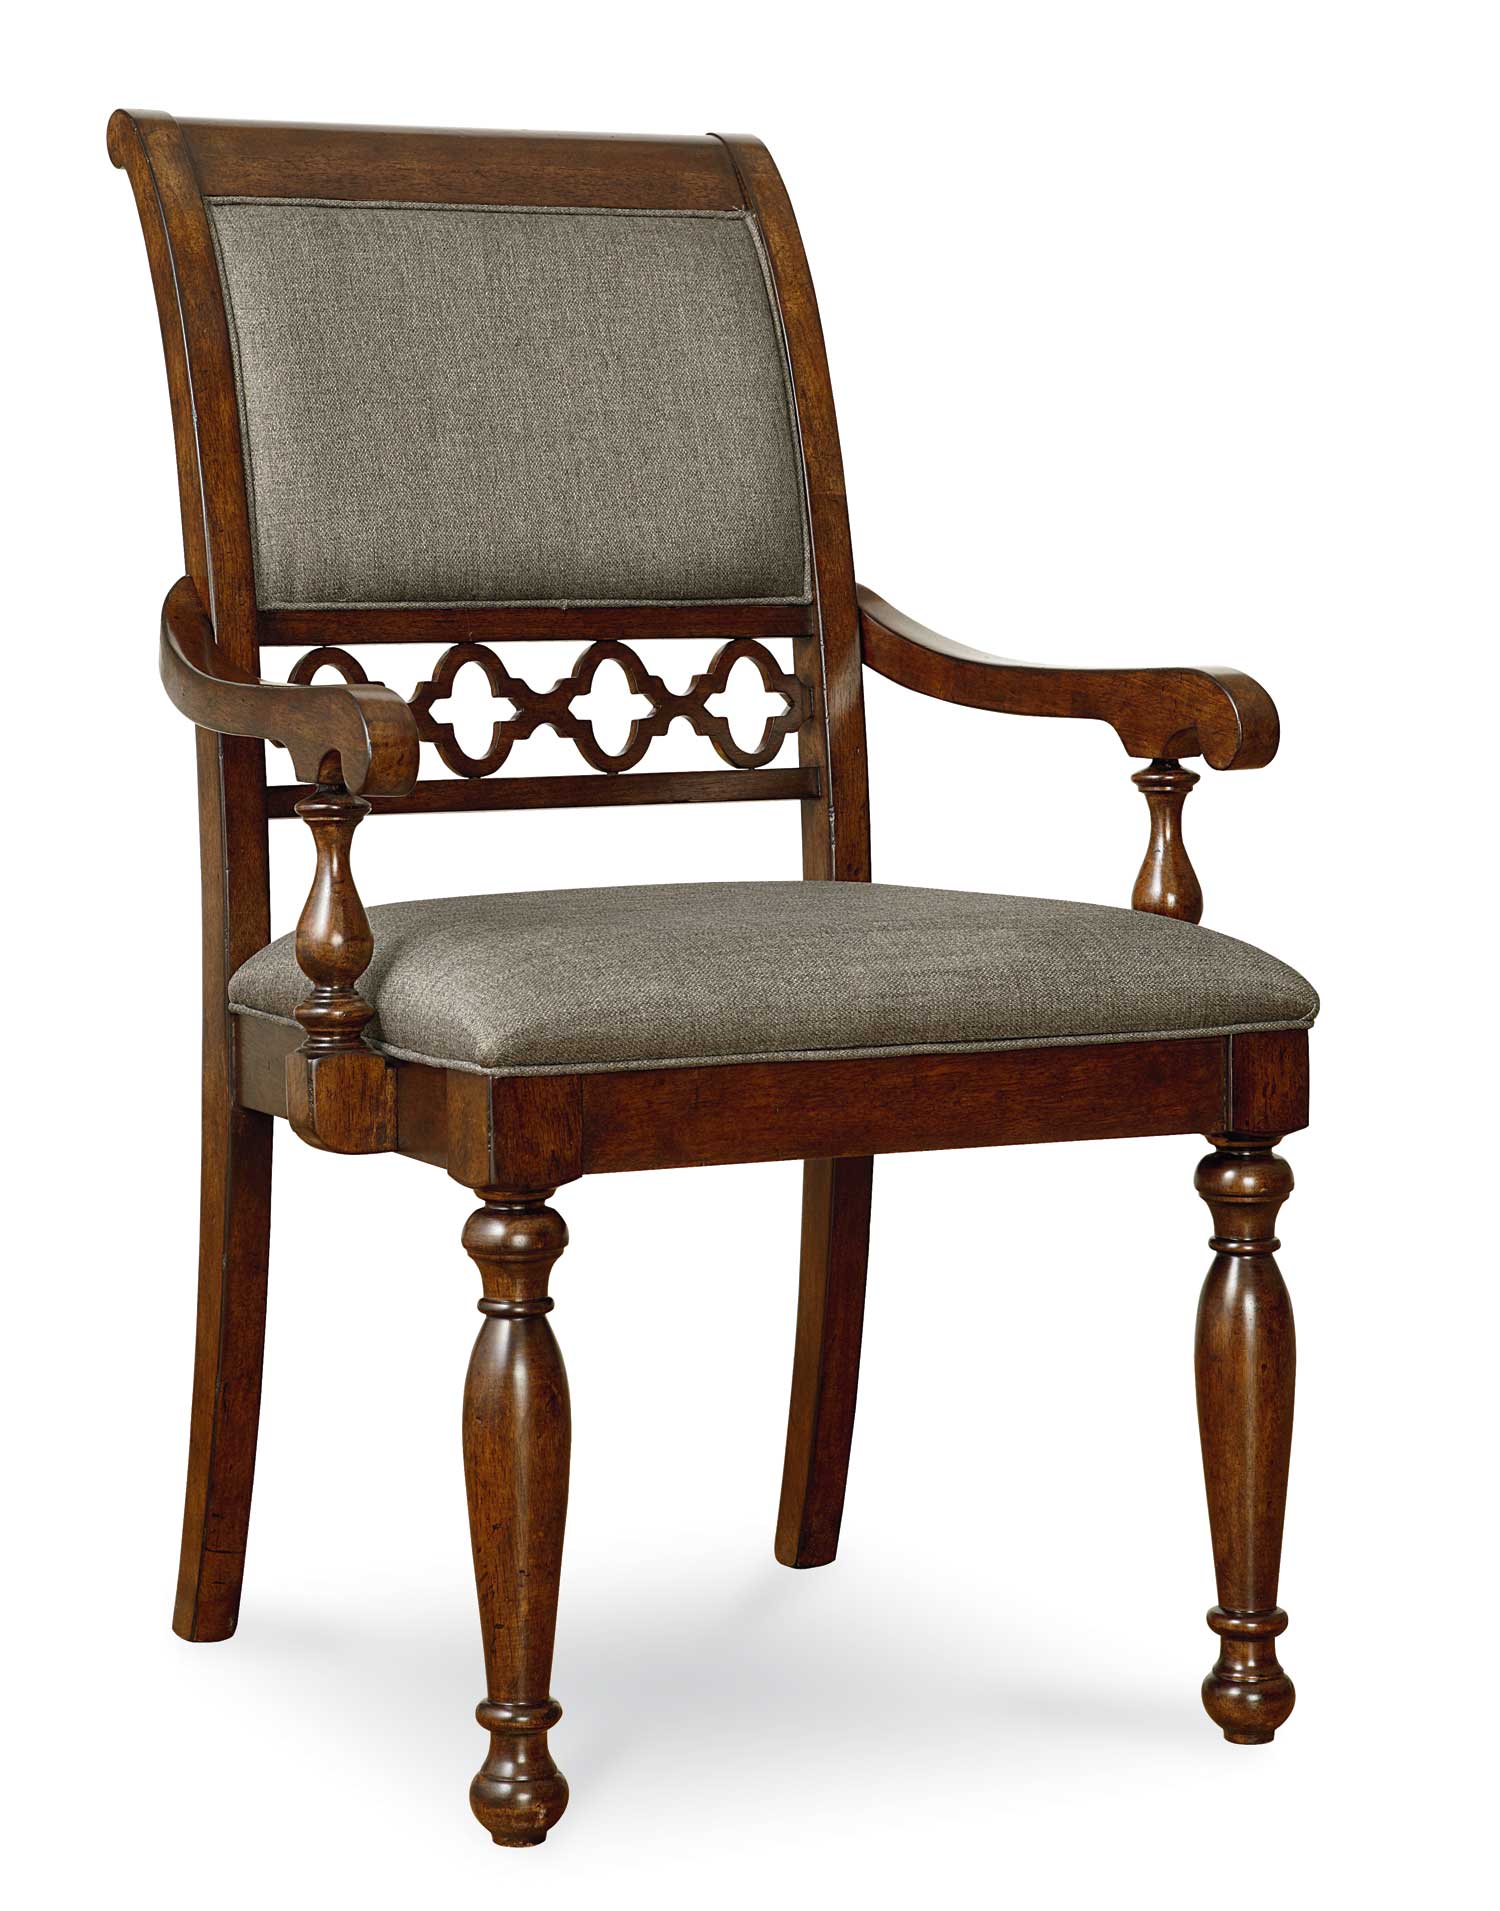 Legacy Classic Thornhill Upholstered Arm Chair - Cinnamon